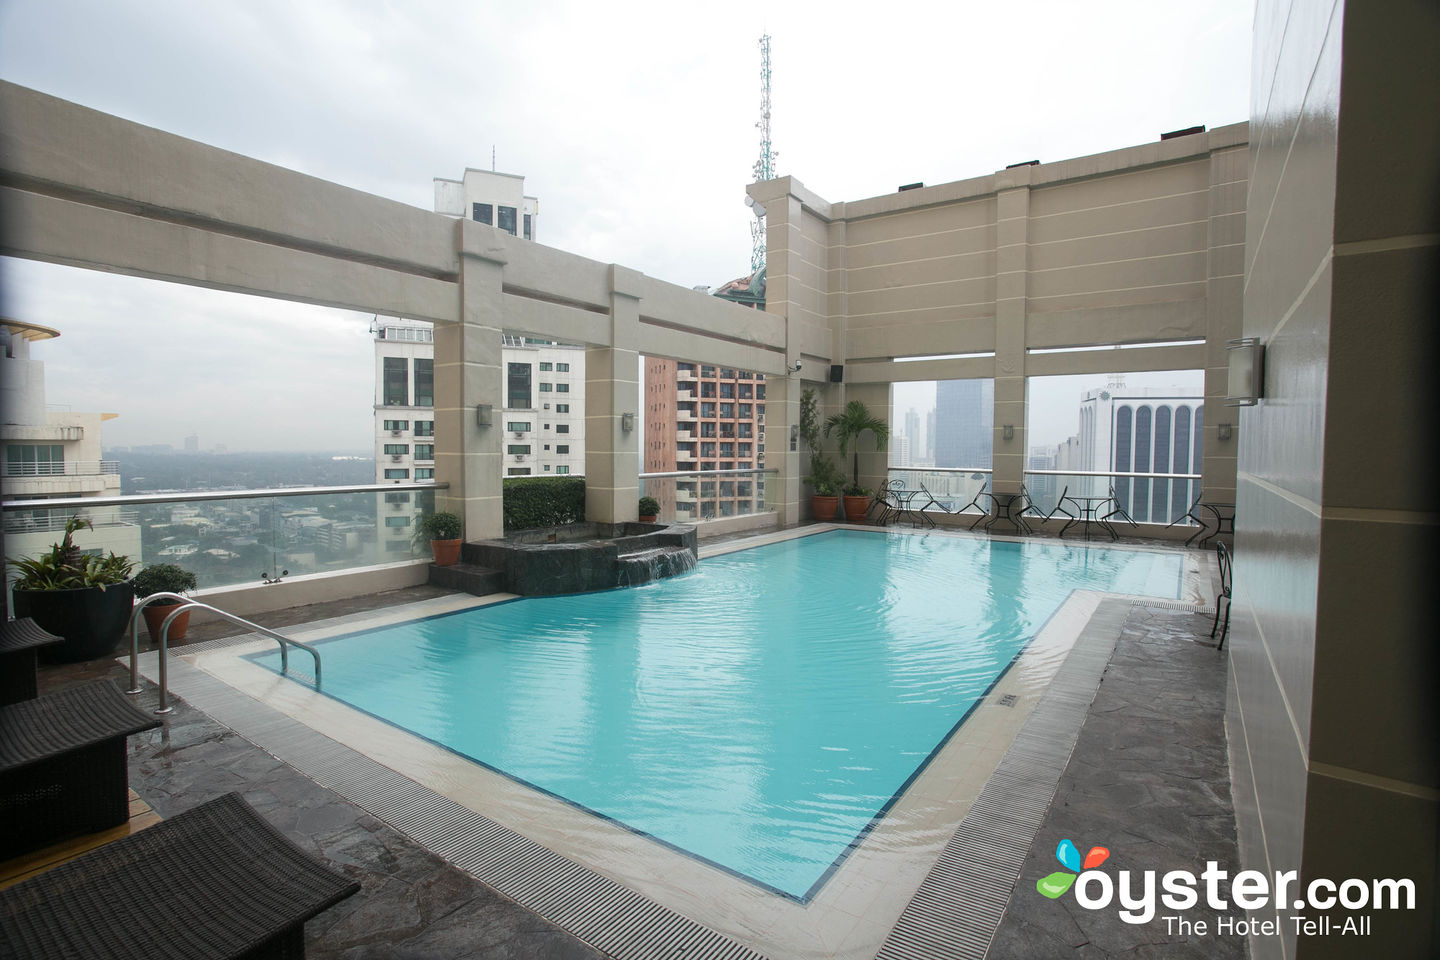 City Garden Hotel Makati Review What To Really Expect If You Stay